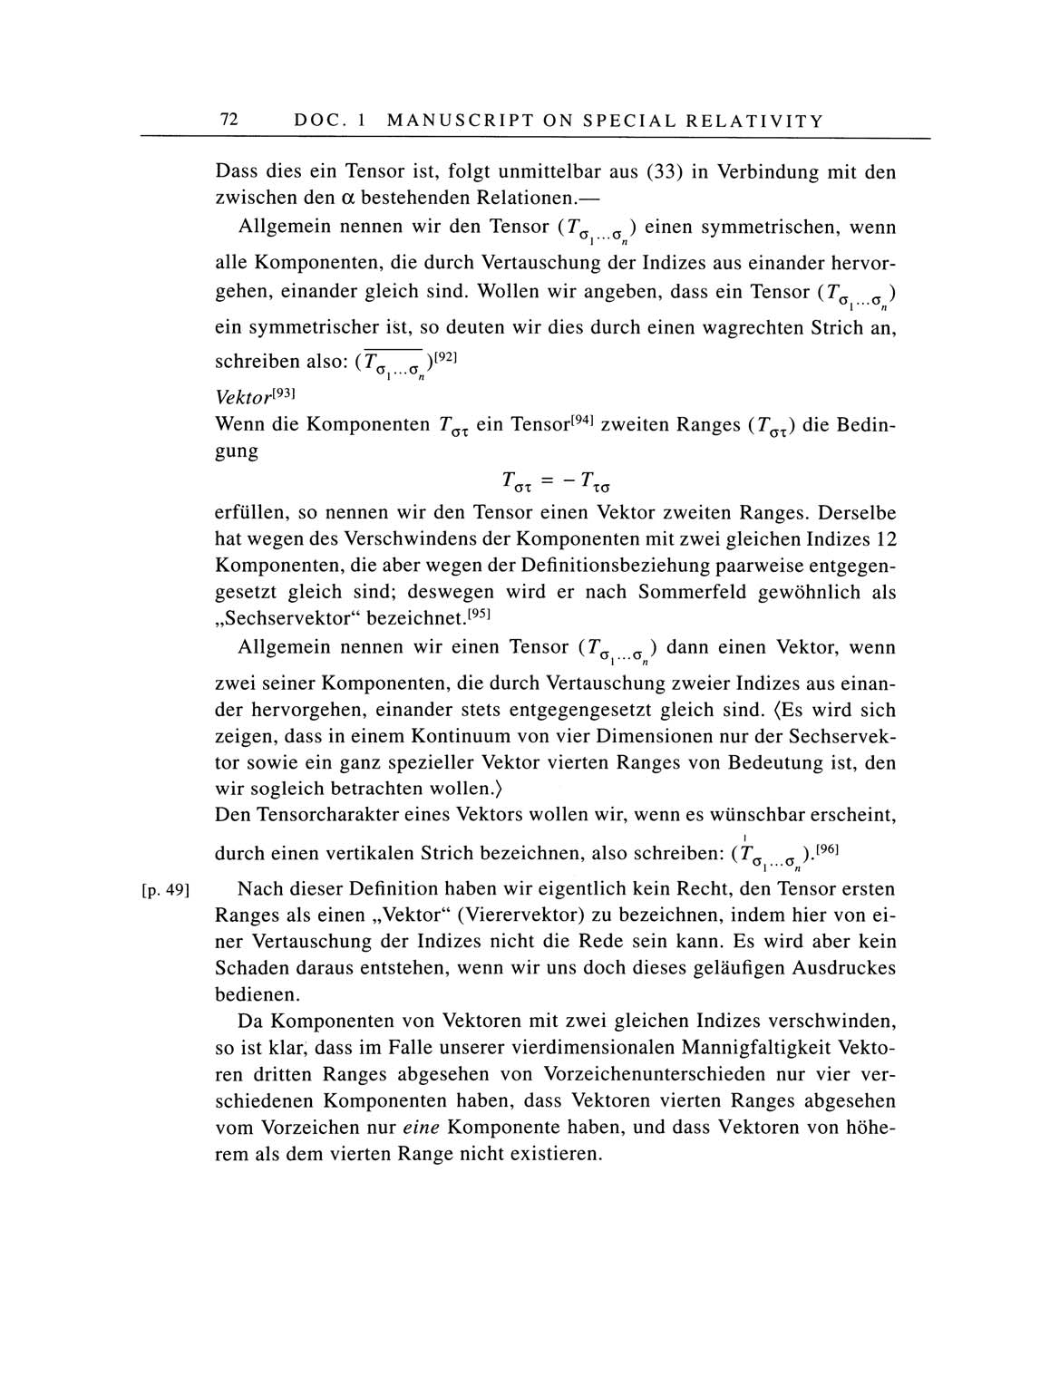 Volume 4: The Swiss Years: Writings 1912-1914 page 72